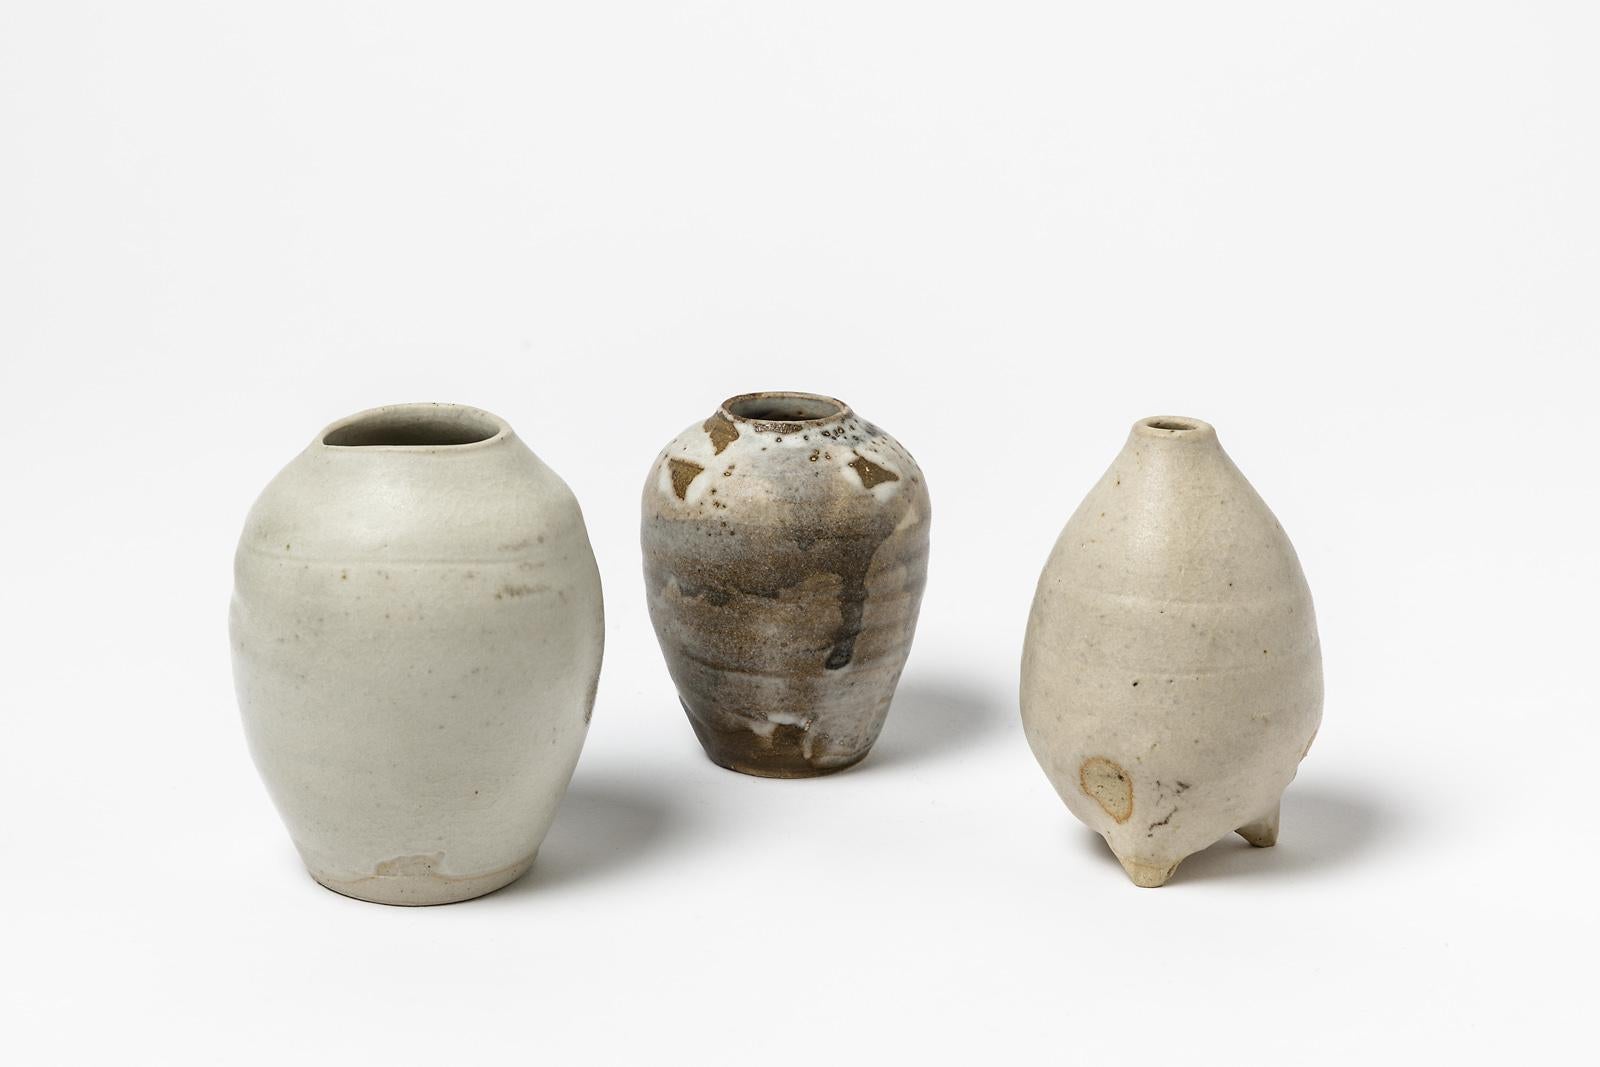 Lukas Richarz

Set of three small ceramic vases

Original white and grey ceramic colors,

21st century interior design

Original perfect conditions, signed under the bases

Realized circa 2010

Measures: Number one height 8cm, large